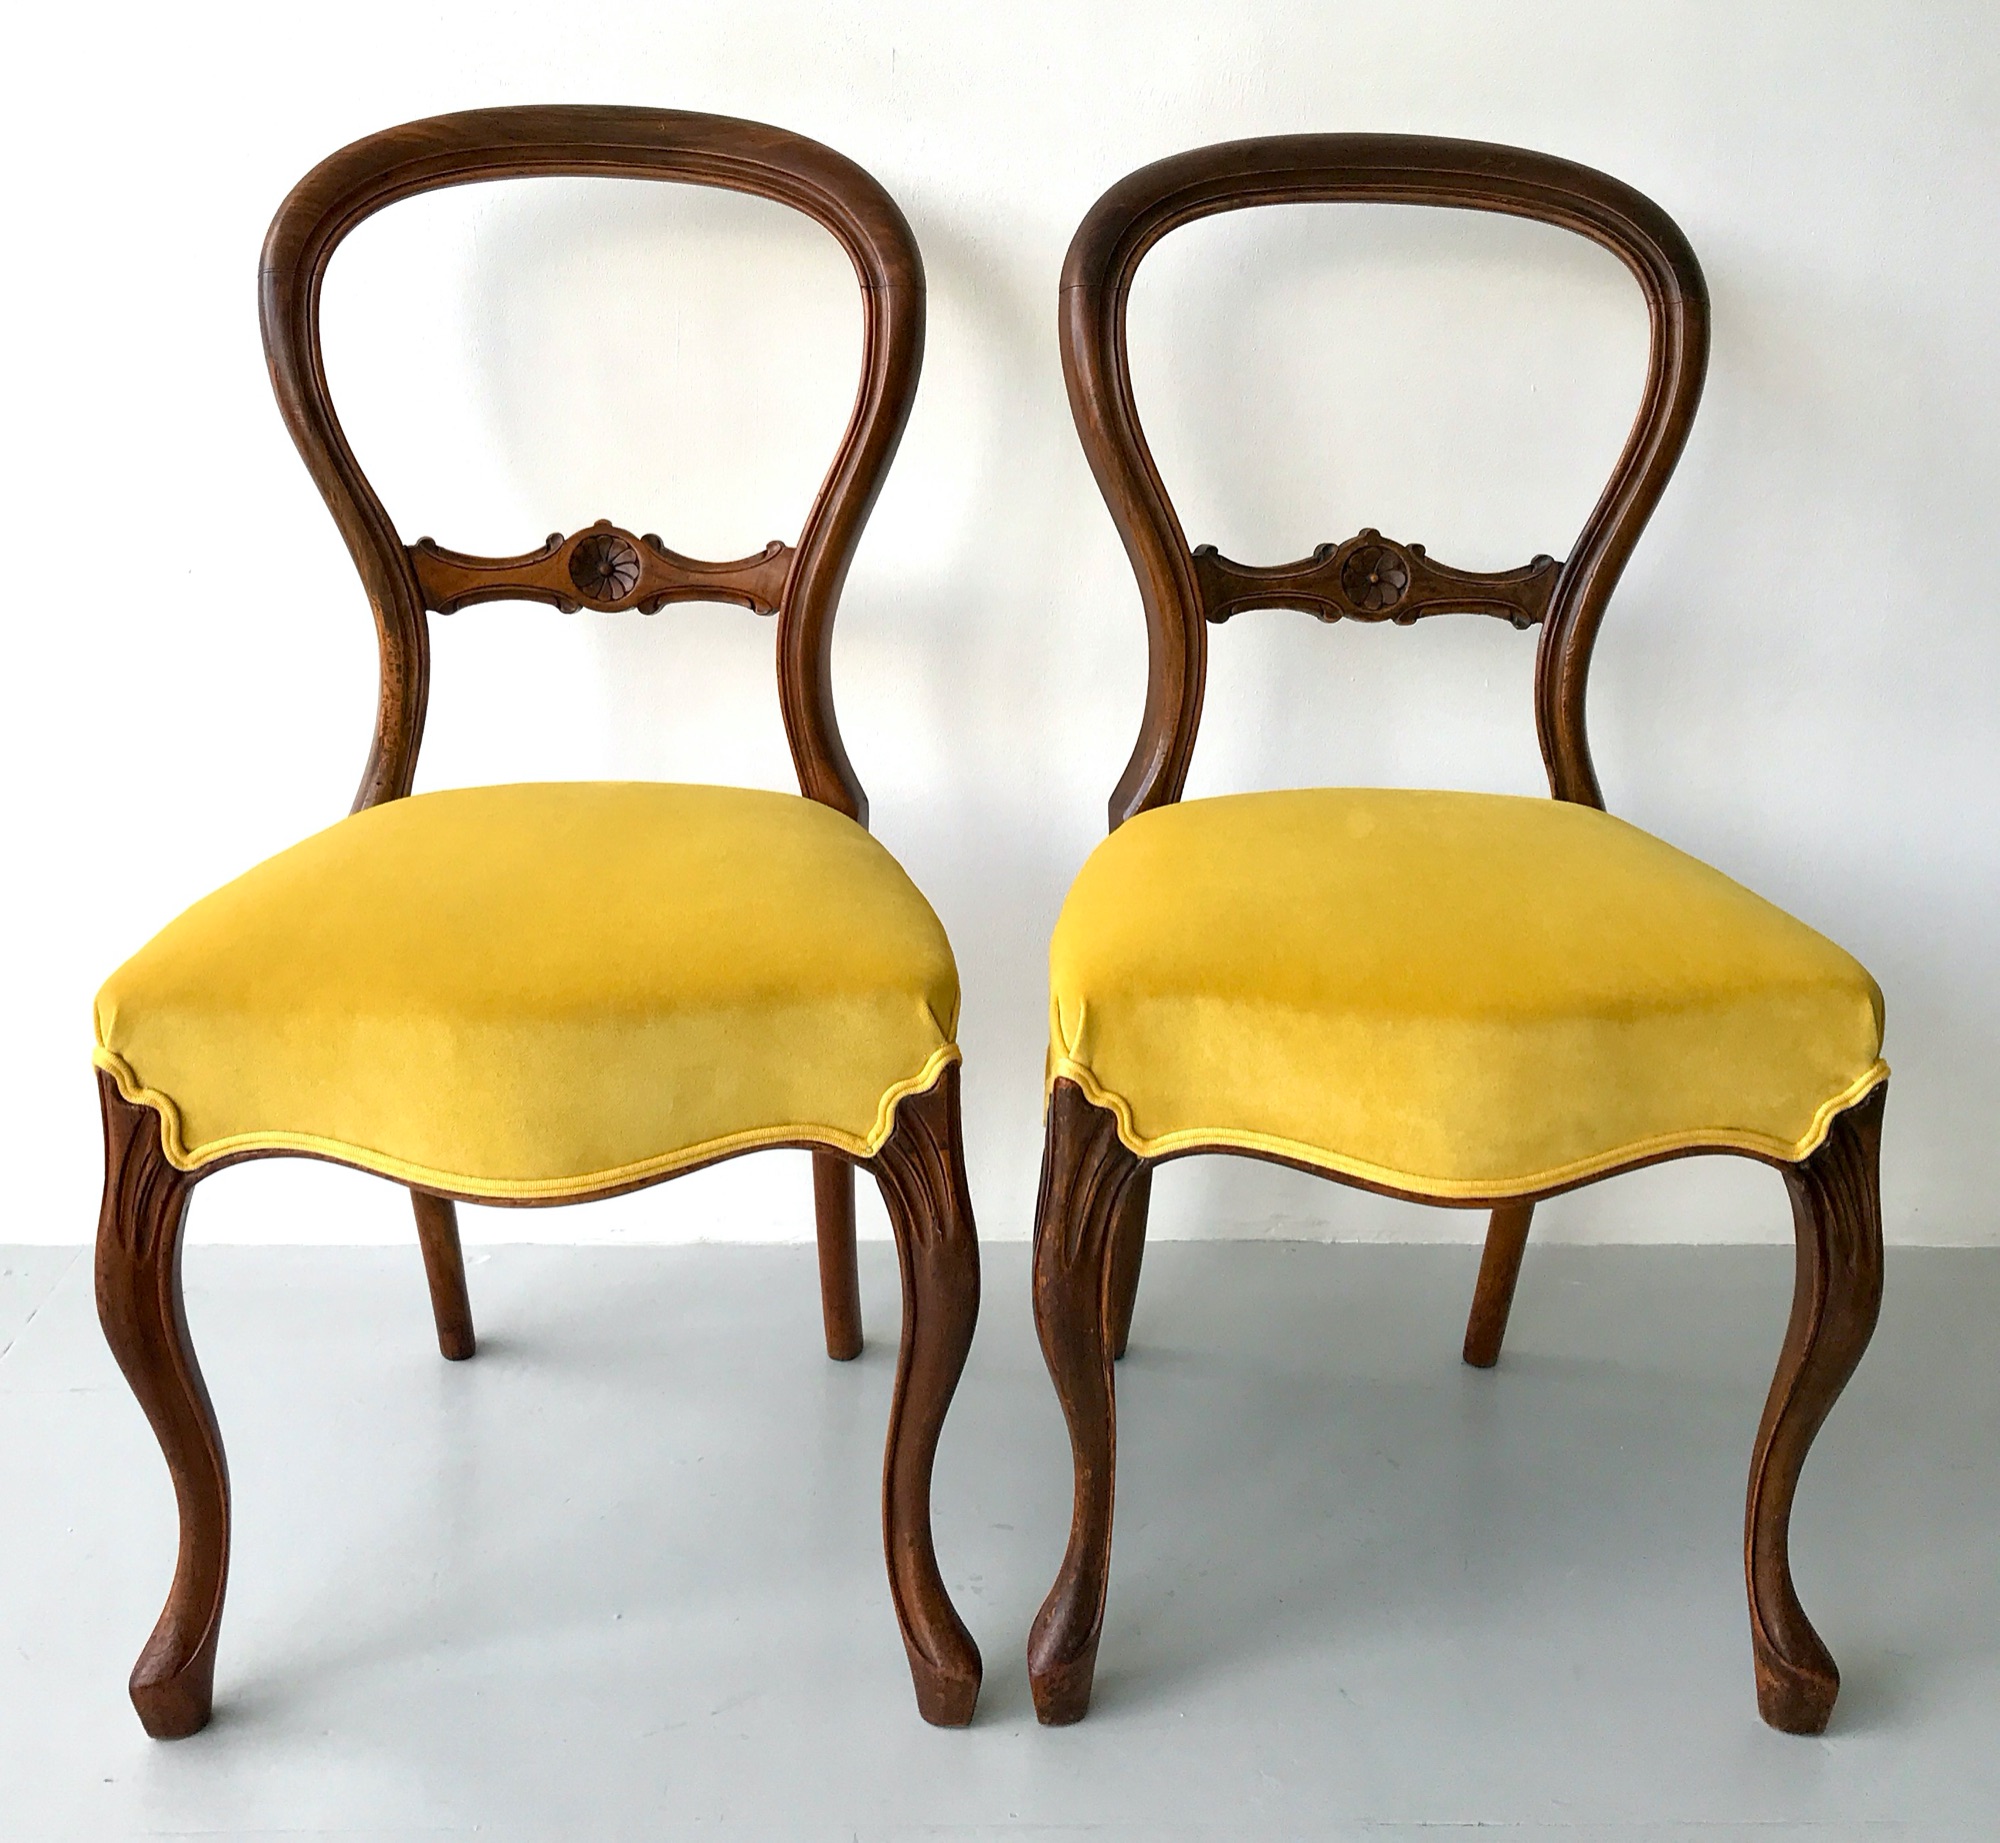 Victorian Balloon back chairs